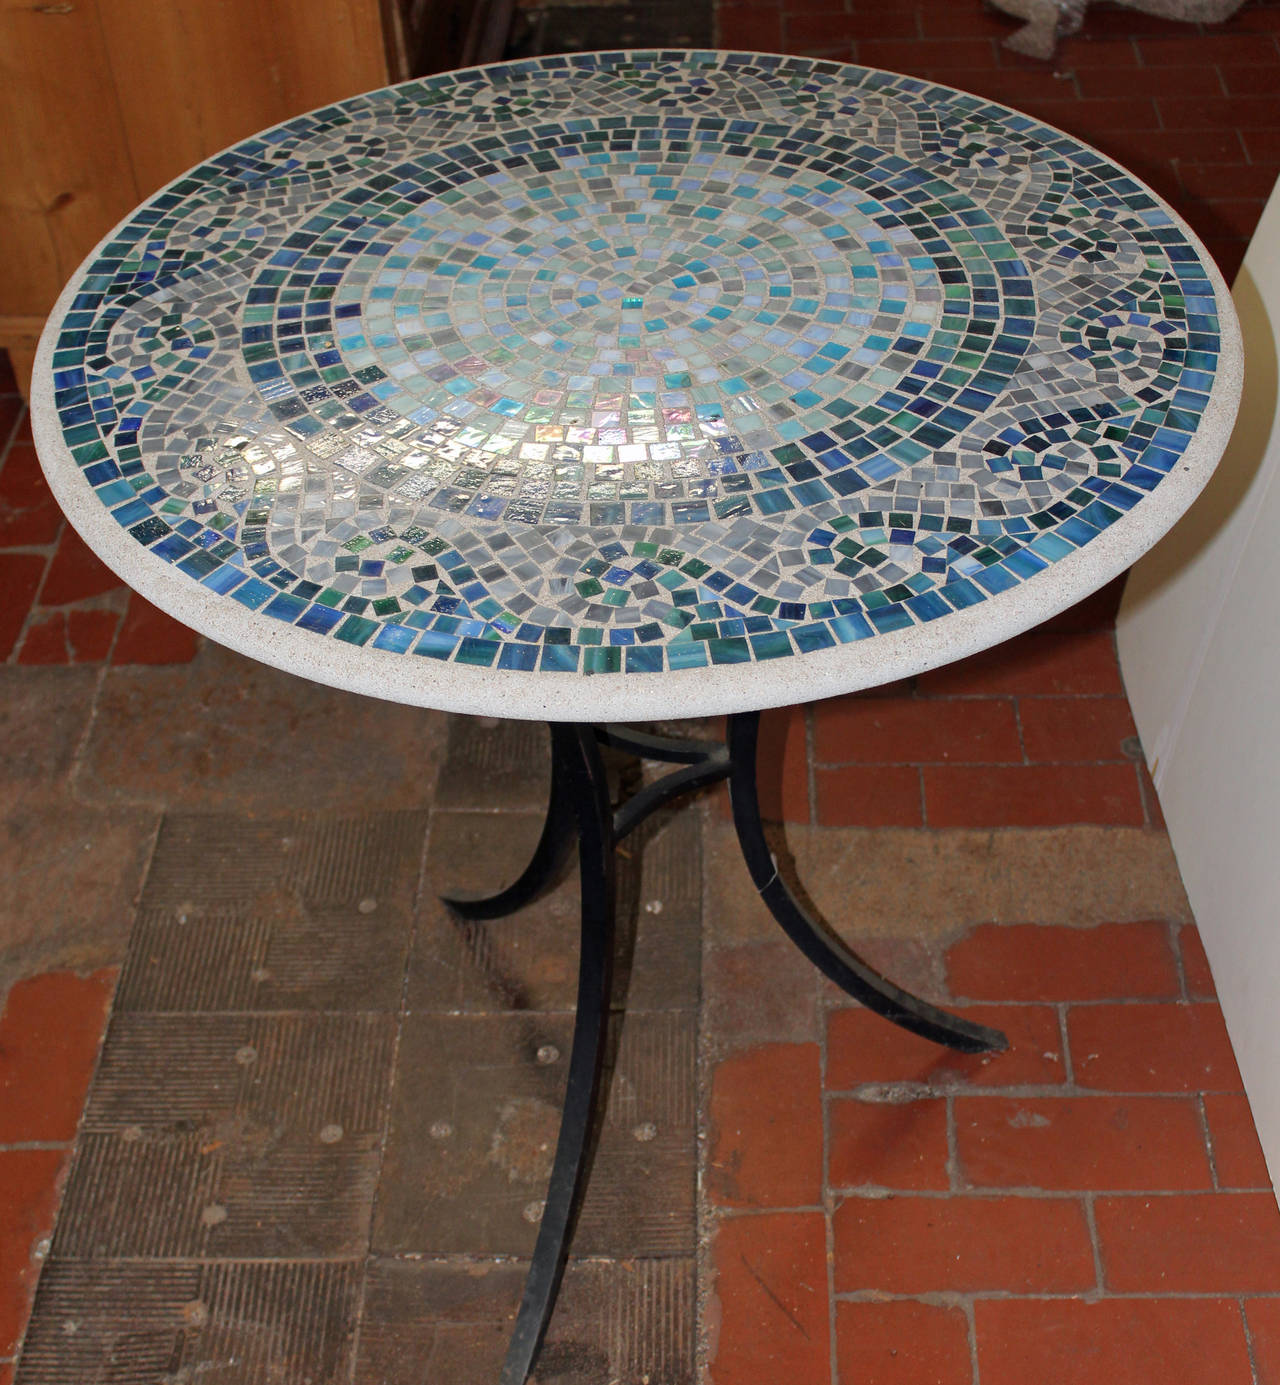 Whimsical mosaic breakfast table on blackened cast iron base.  The iridescent mosaic tiles are set in a sanded concrete.  The tri-legged base is in blackened steel